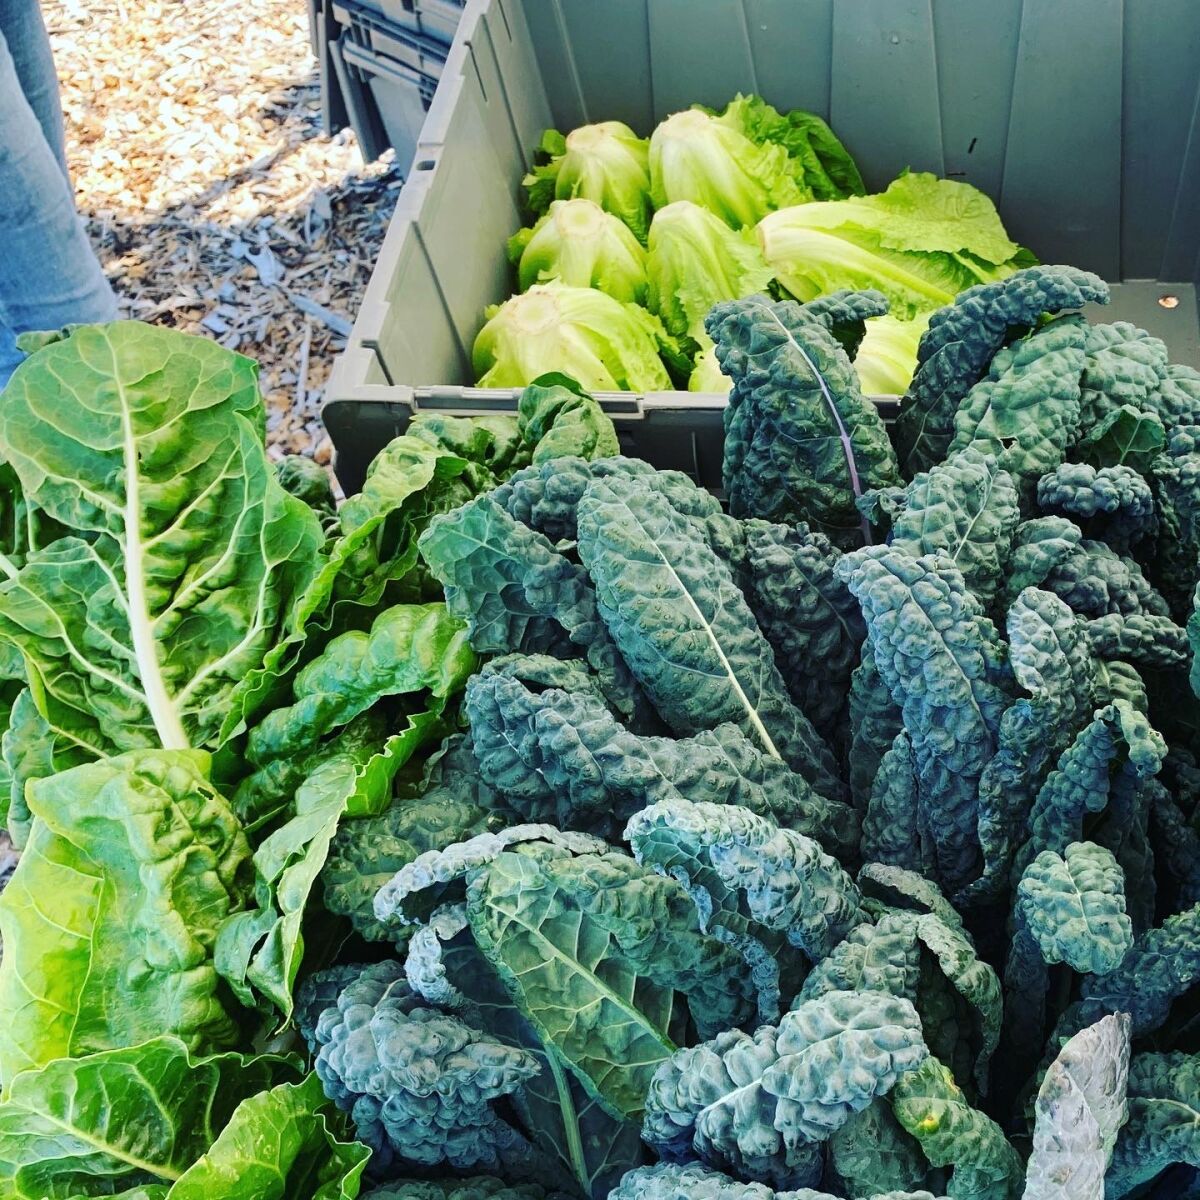 Romaine, kale and chard harvested for Encinitas district families.